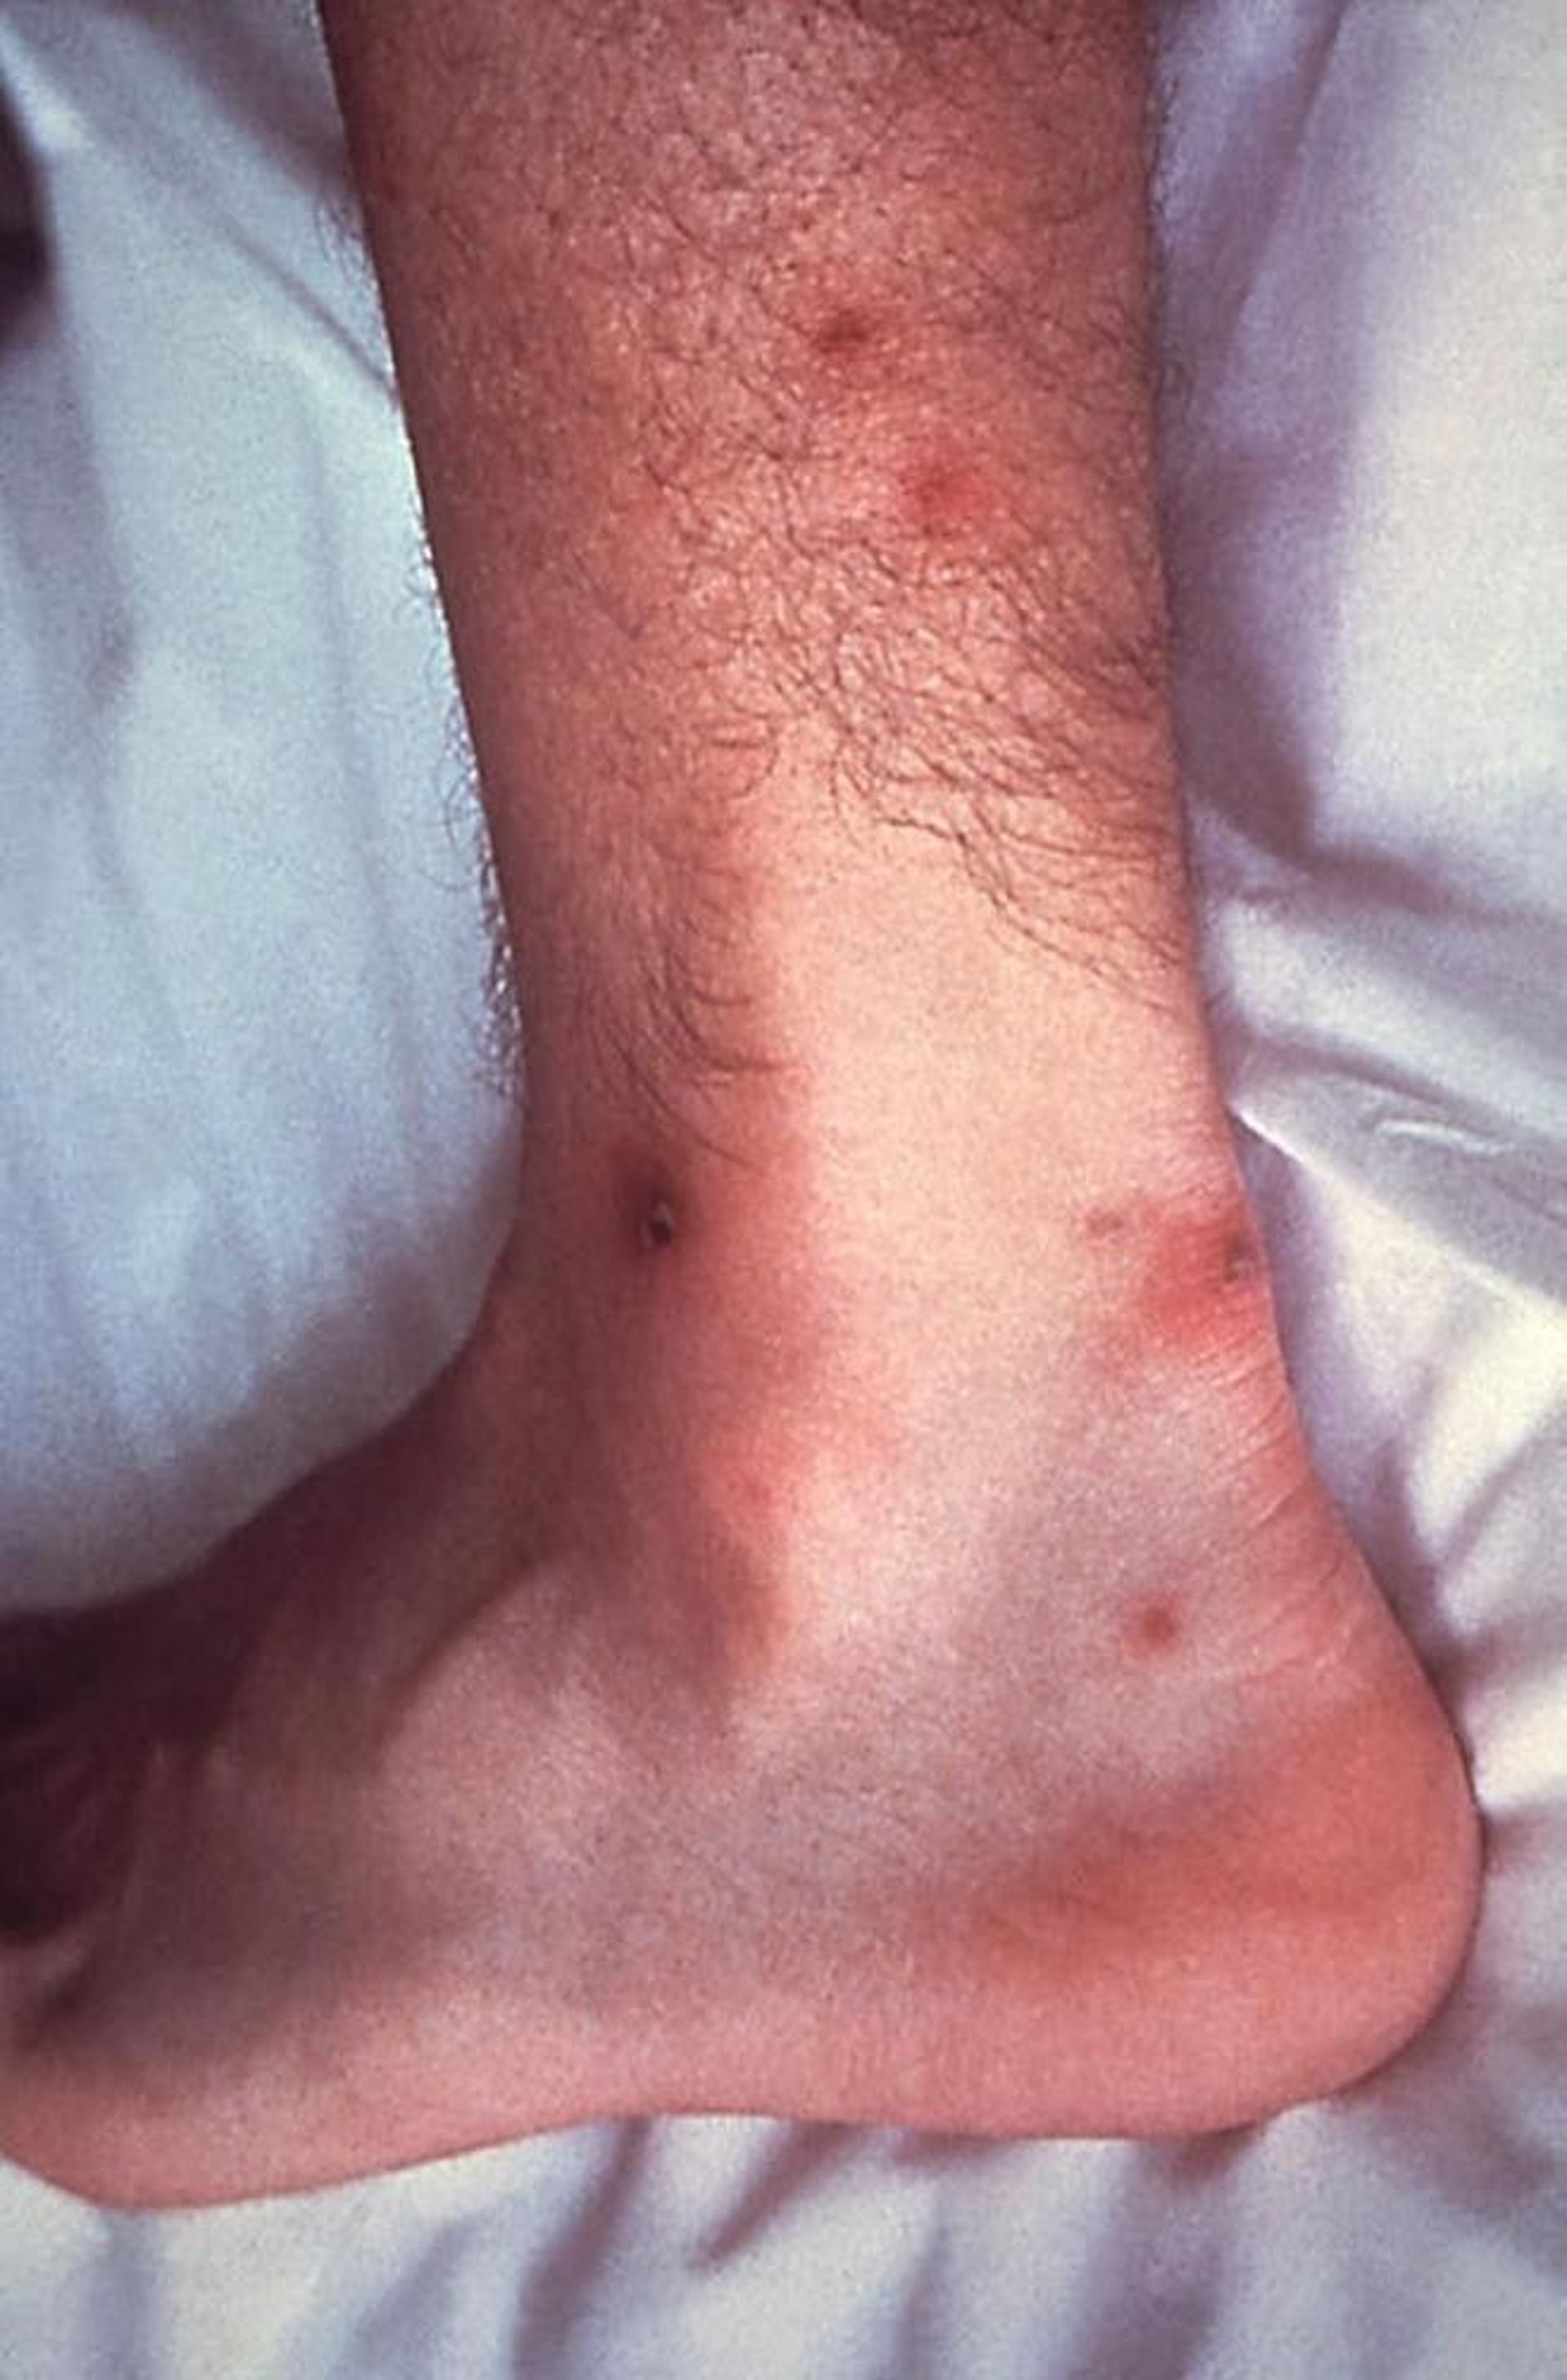 Disseminated Gonococcal Infection (Skin Lesions)